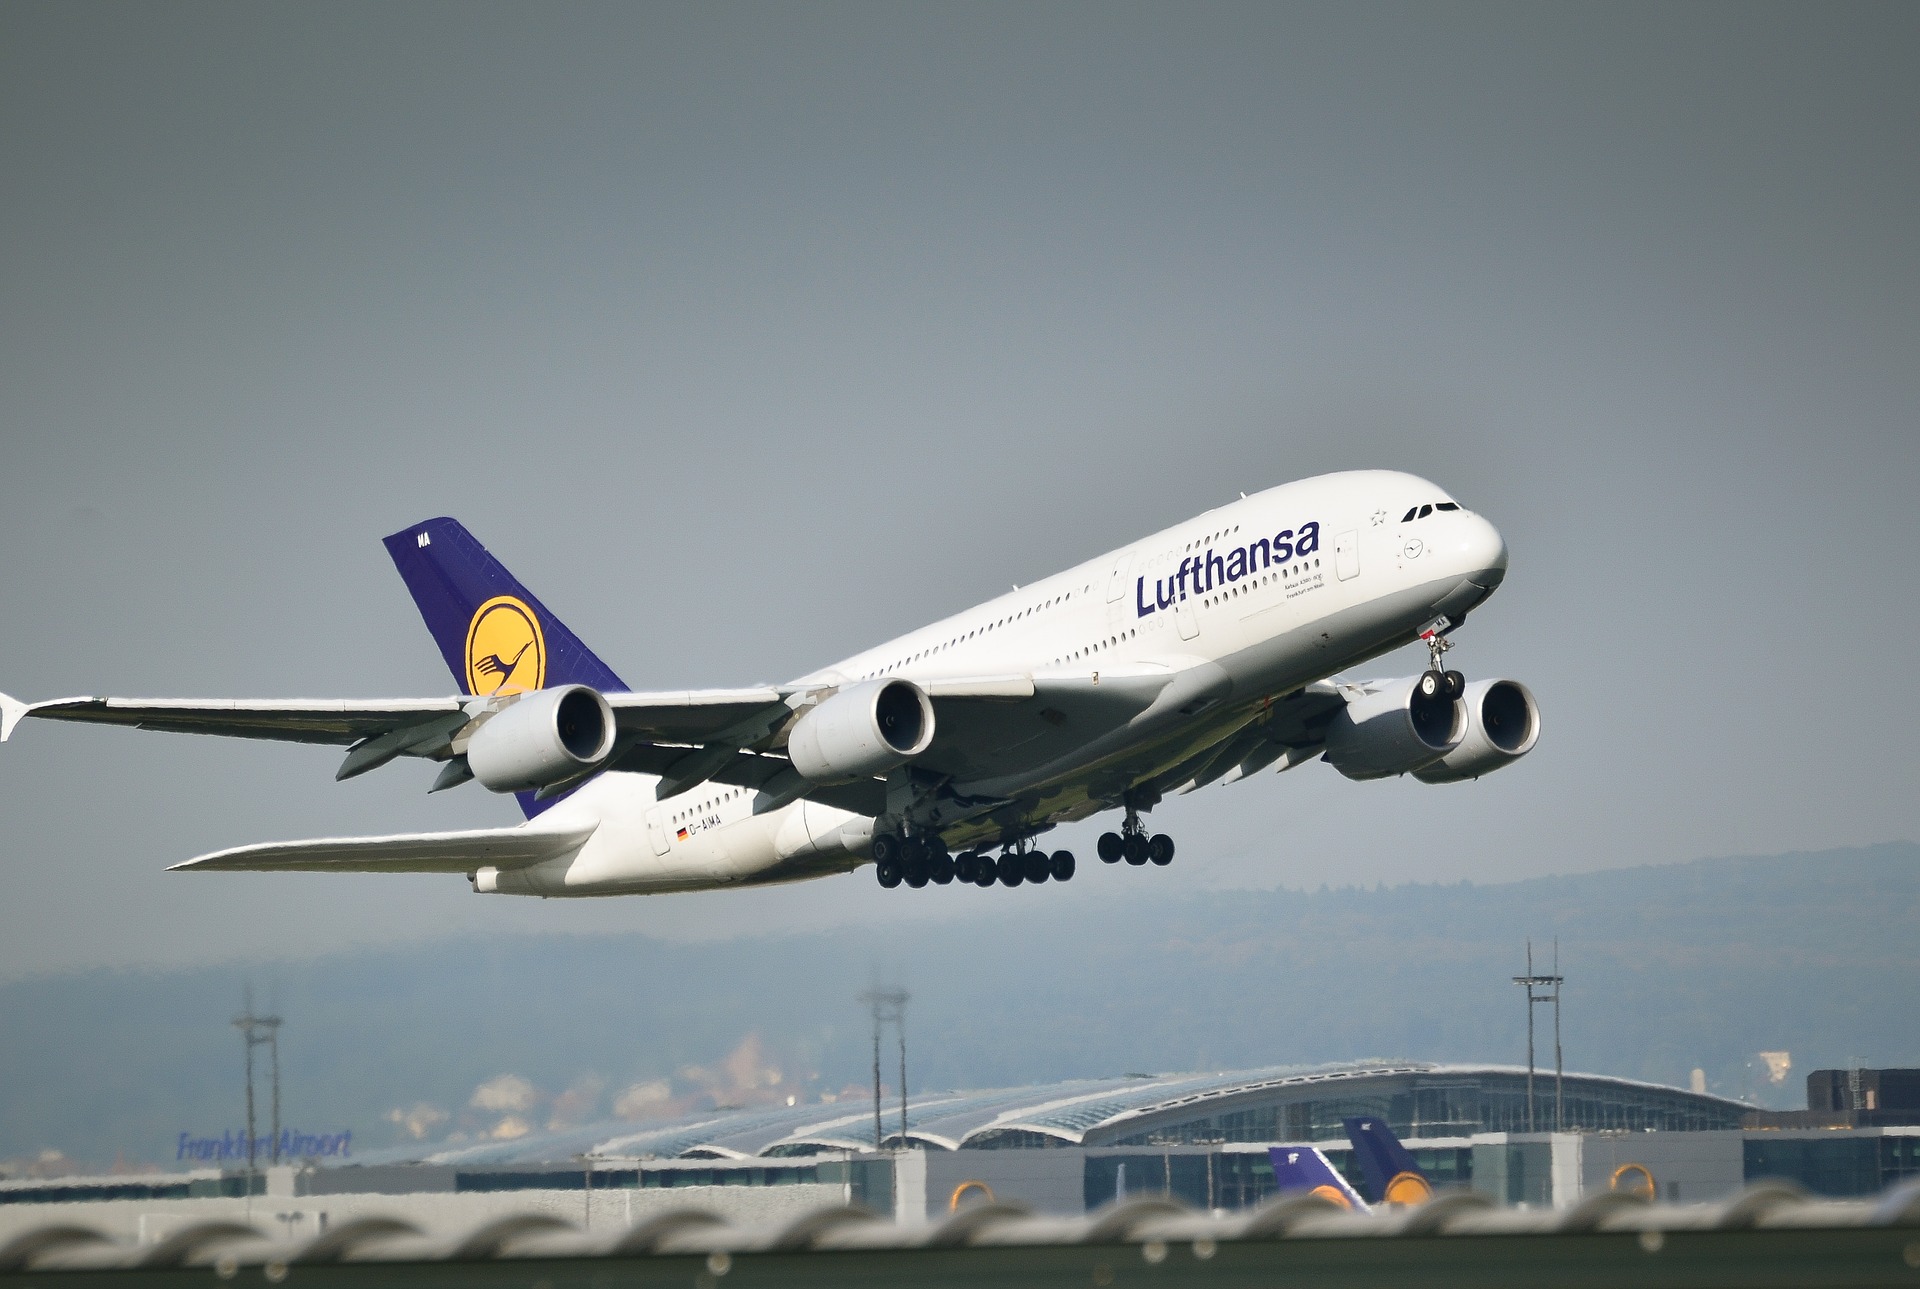 Flying with Lufthansa? Here's what you need to know about their policy so that you can bring your portable oxygen concentrator on your next flight.